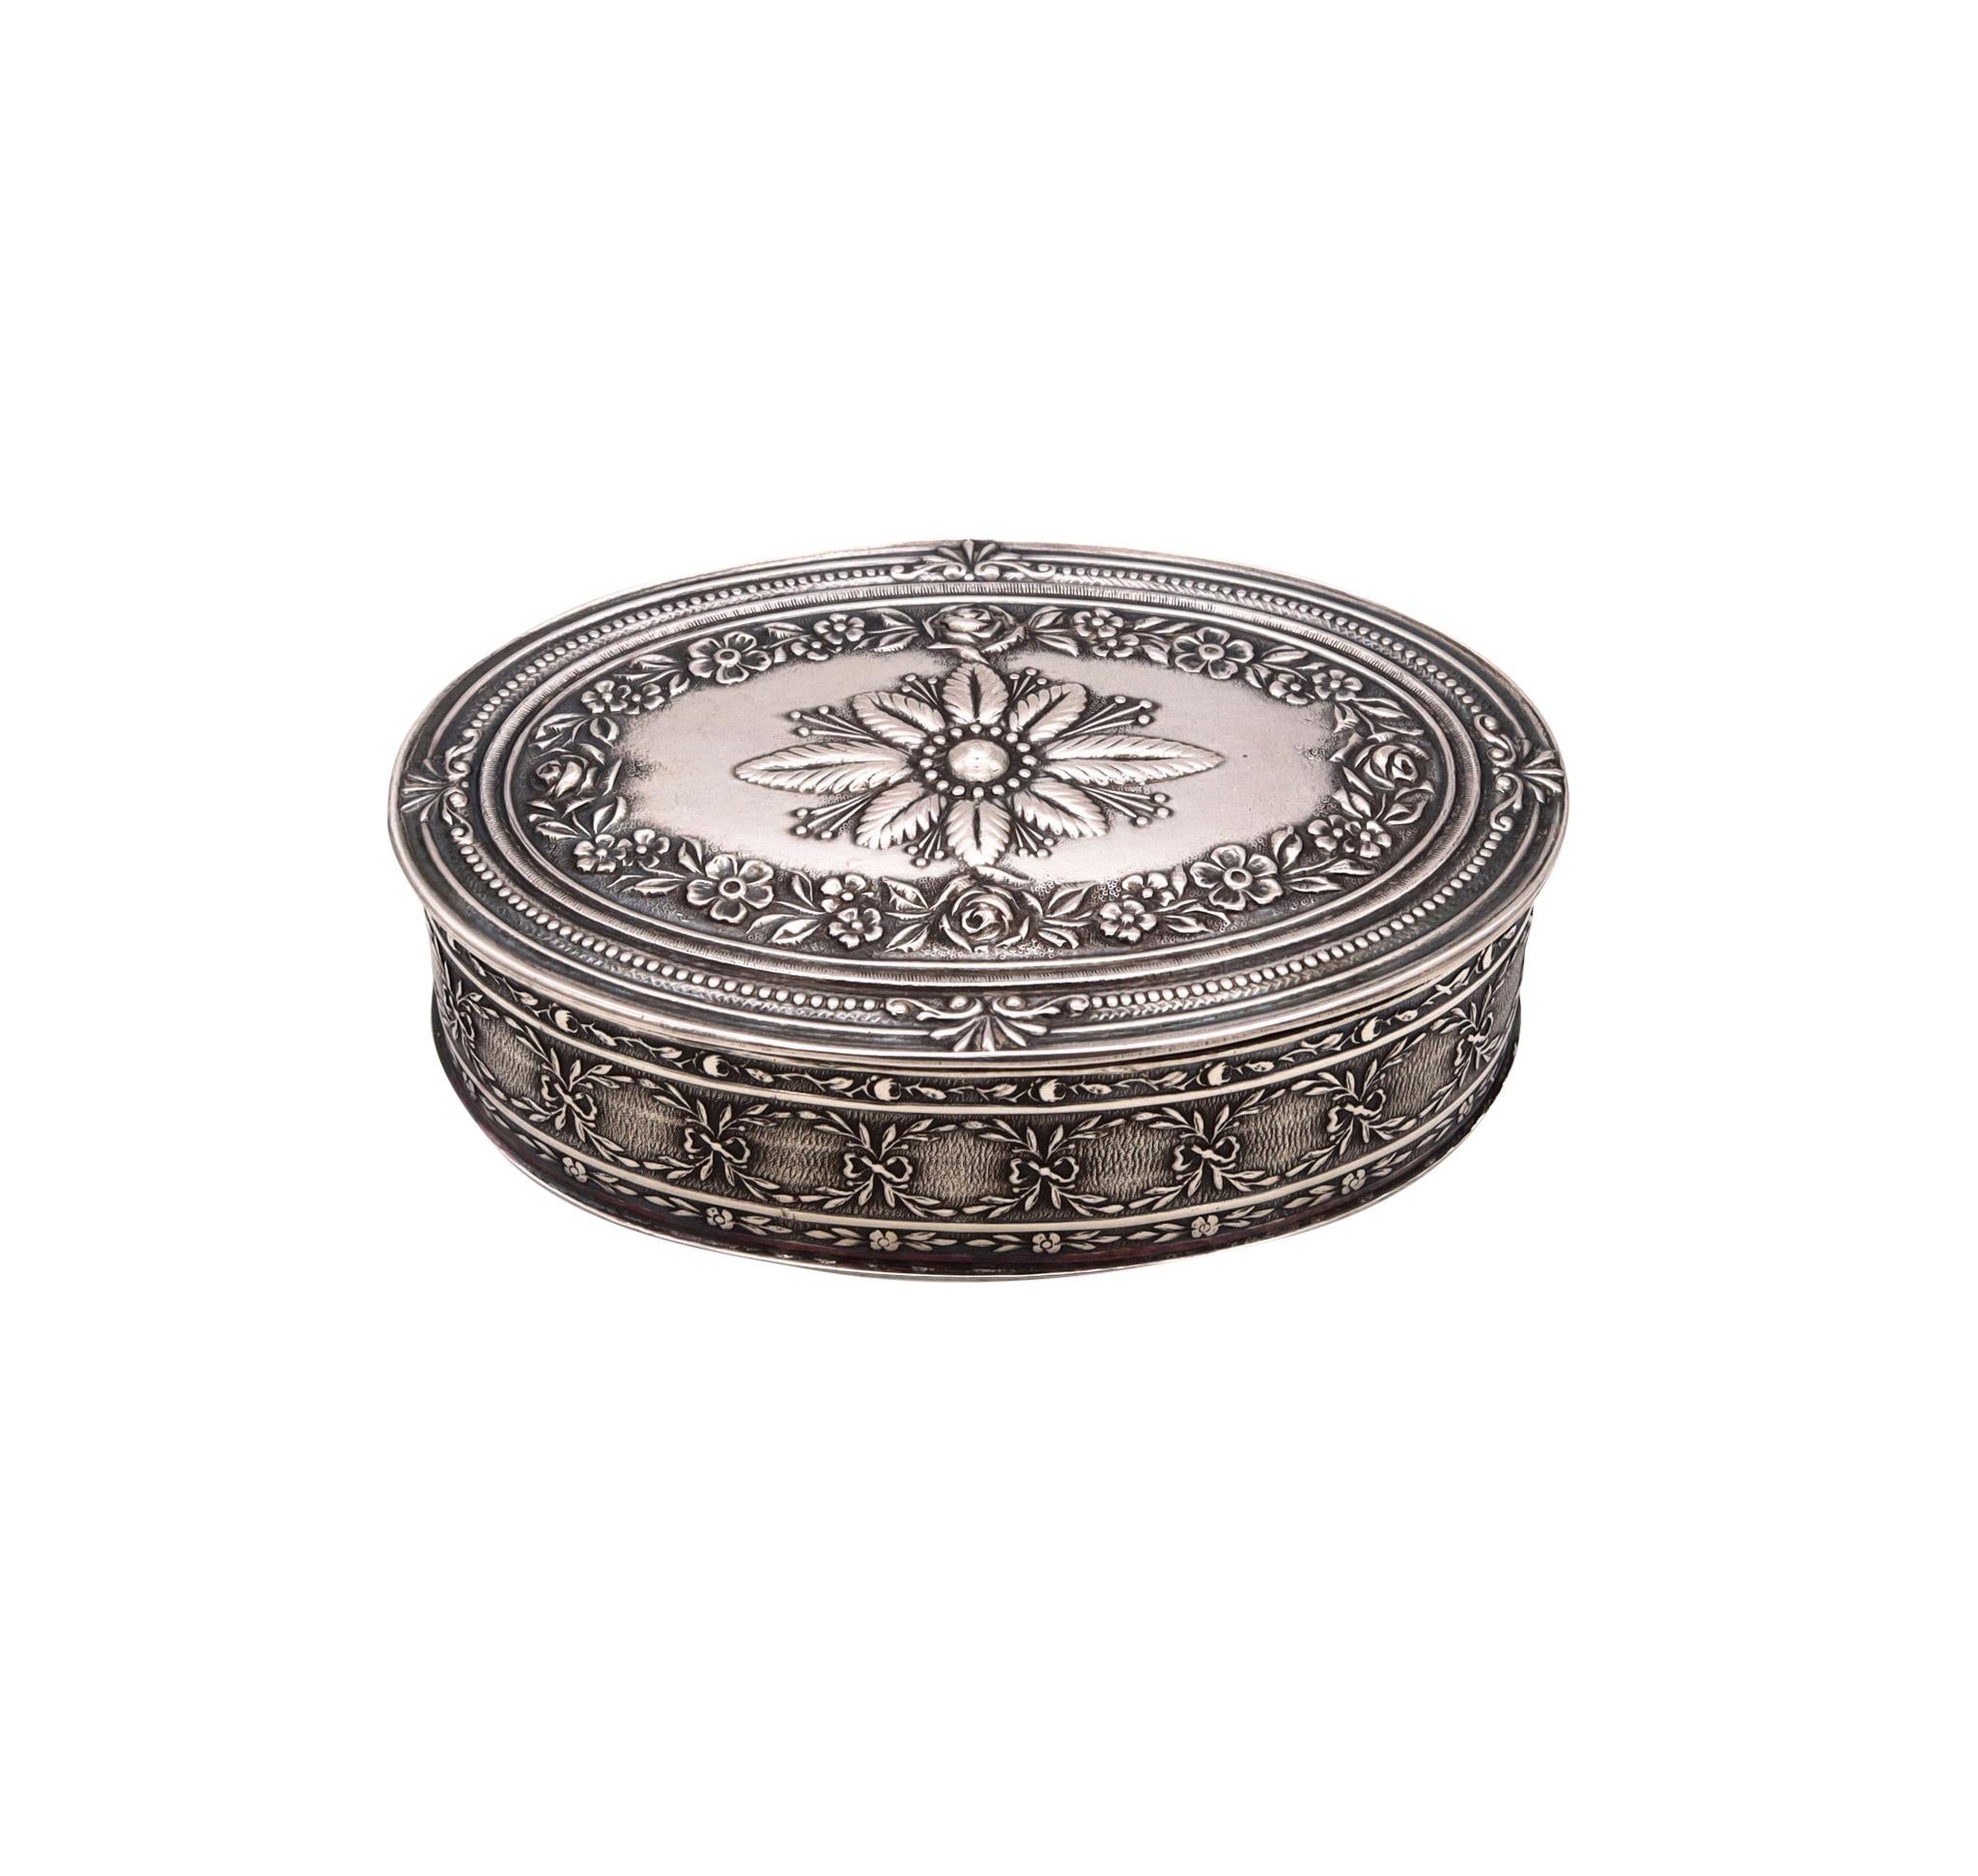 Pill box designed by Jean Puiforcat.

Beautiful three-dimensional oval box made in Paris, France, with embossed details and patterns from the neoclassical style and the Louis XVI period. It was crafted in solid .950/,999 sterling silver and suited